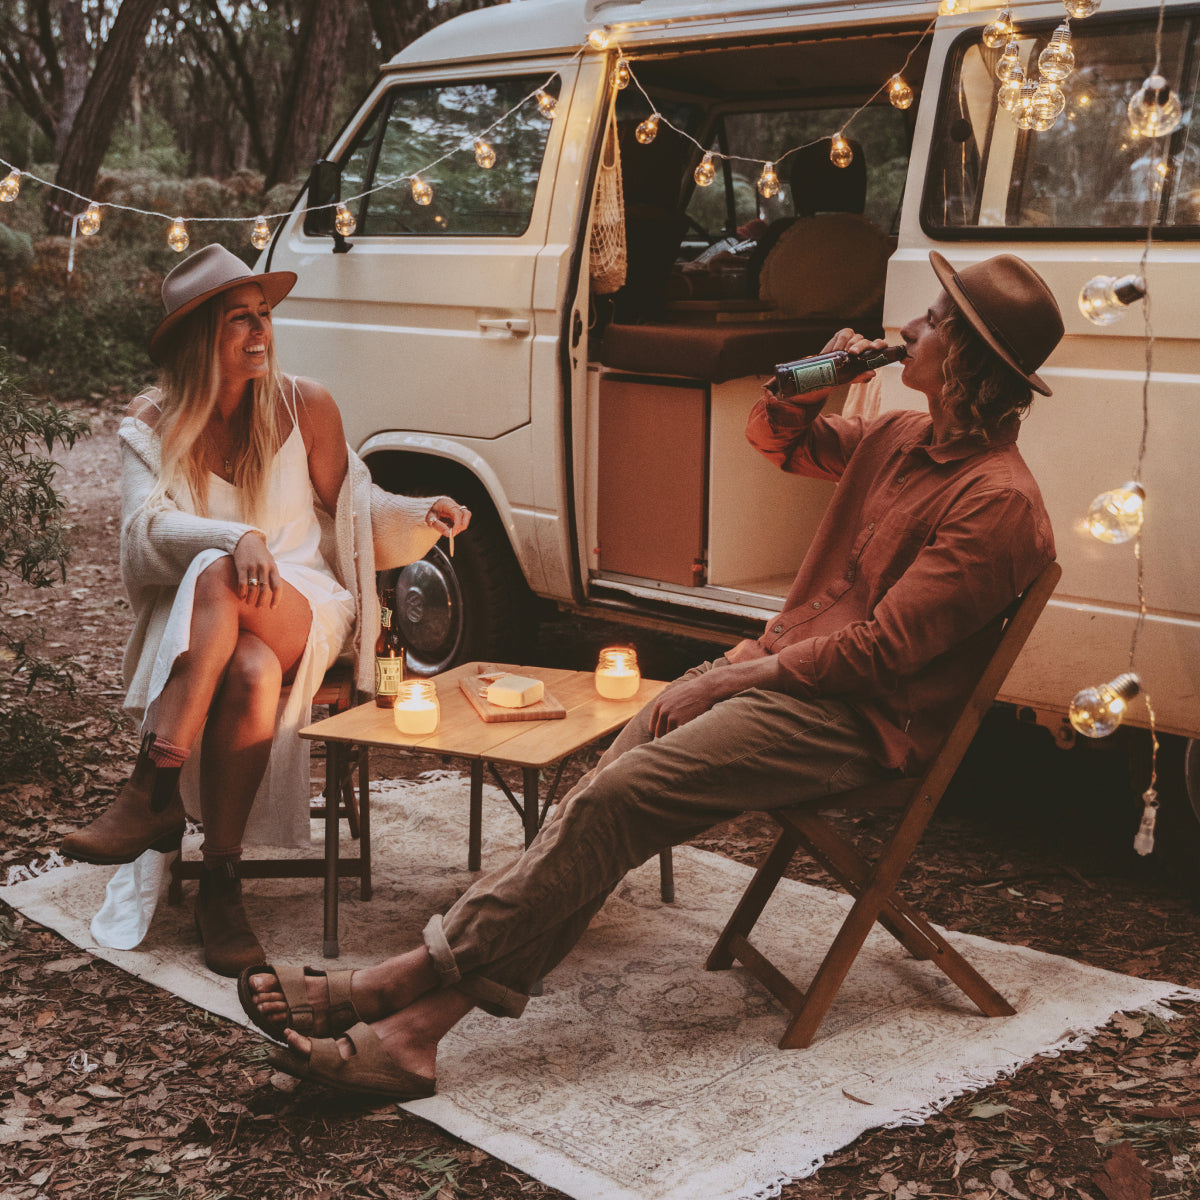 A couple sit next to their van drinking beer and eating cheese on outdoor chairs